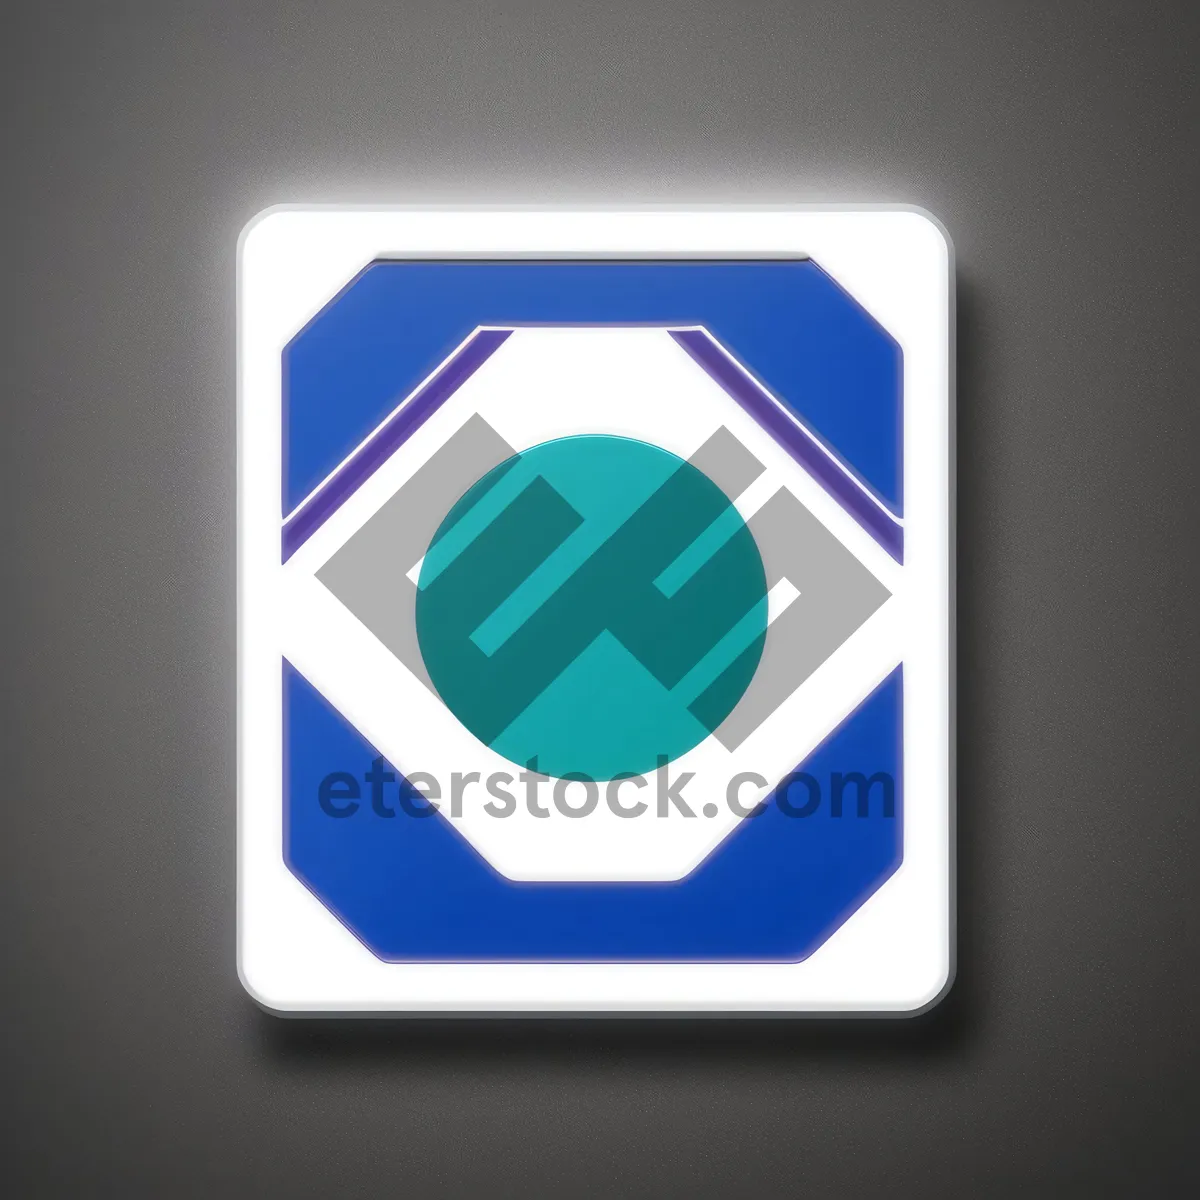 Picture of Stereo Button - Shiny Web Icon